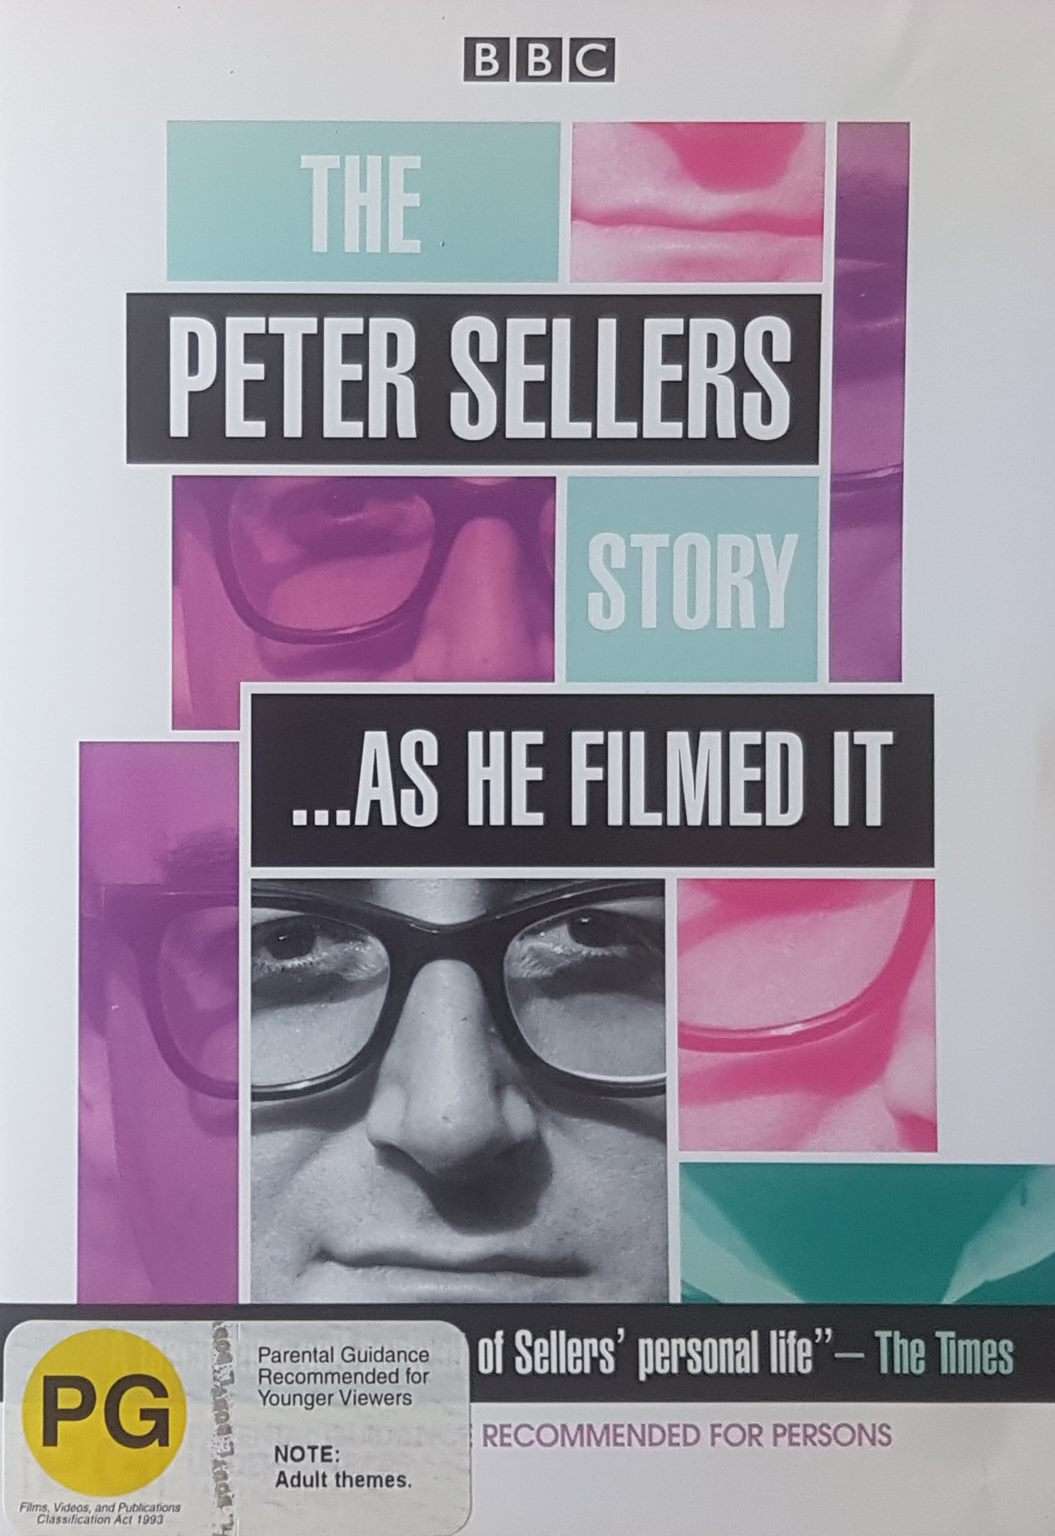 The Peter Sellers Story as He Filmed It